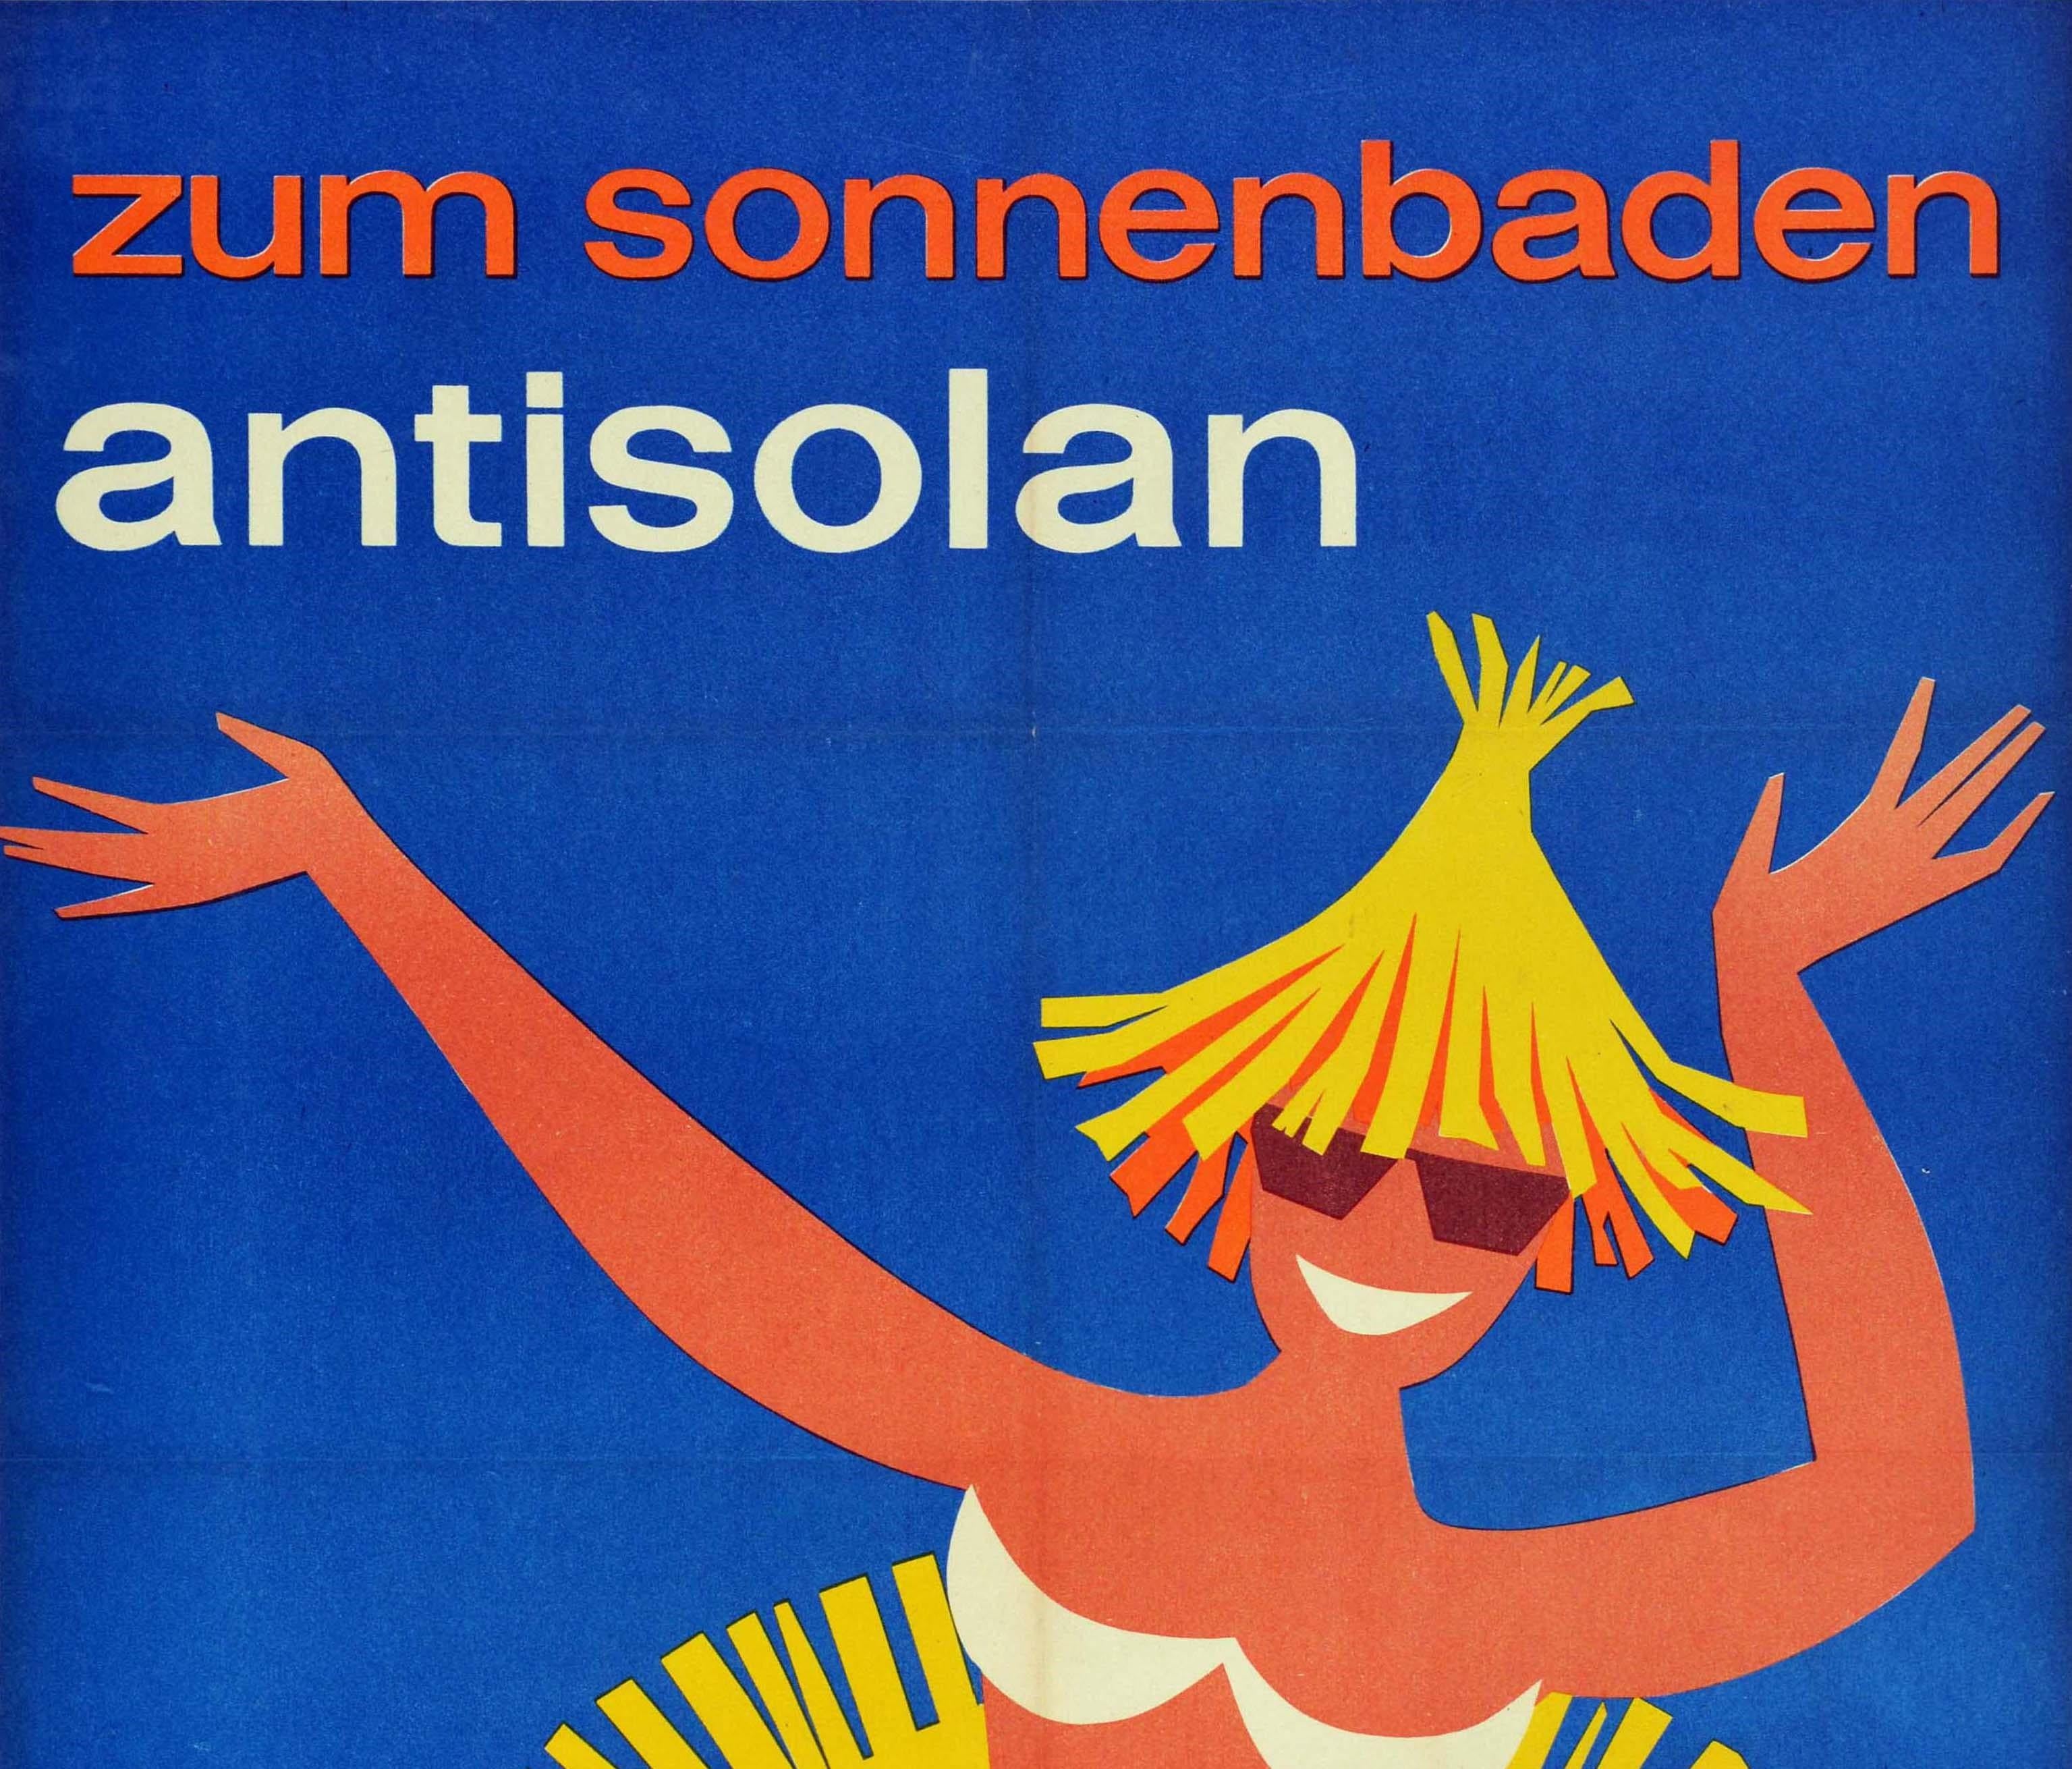 Original vintage advertising poster for Antisolan sun cream lotion - zum sonnenbaden antisolan / for sunbathing - featuring a bold and colourful design of a smiling lady wearing a white bikini with sunglasses and a yellow straw hat raising her arms